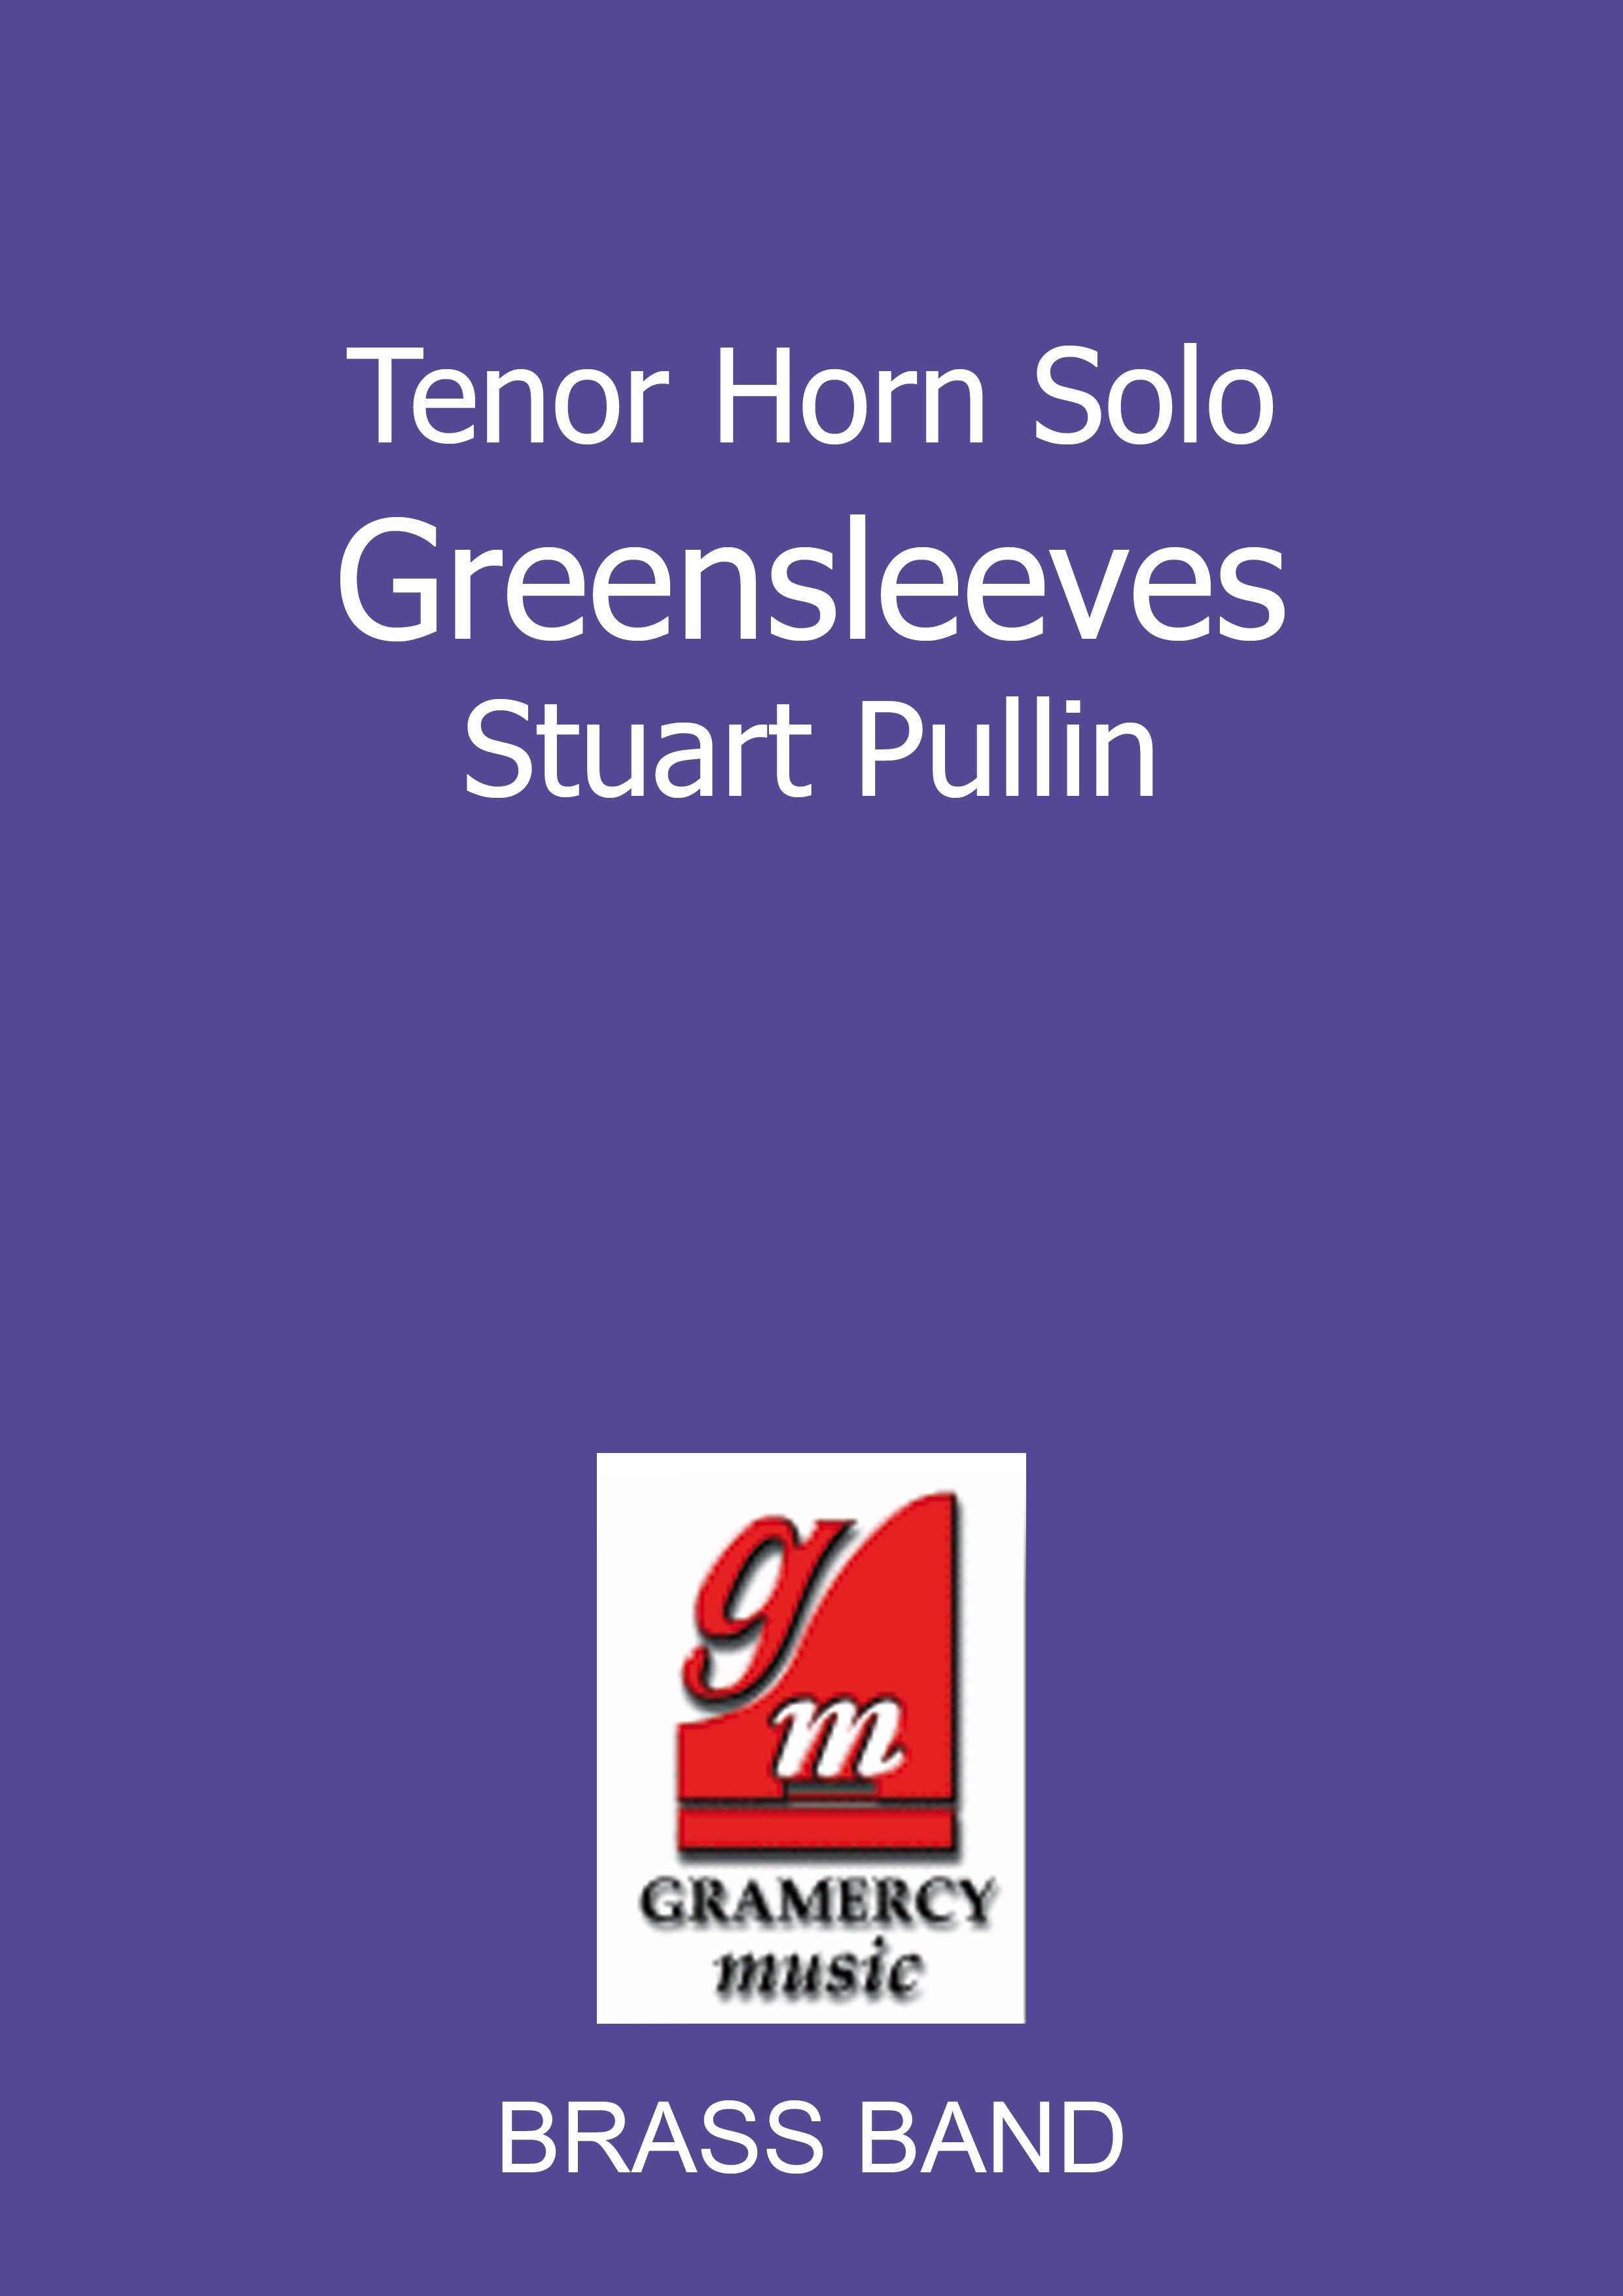 Greensleeves (Tenor Horn Solo with Brass Band)